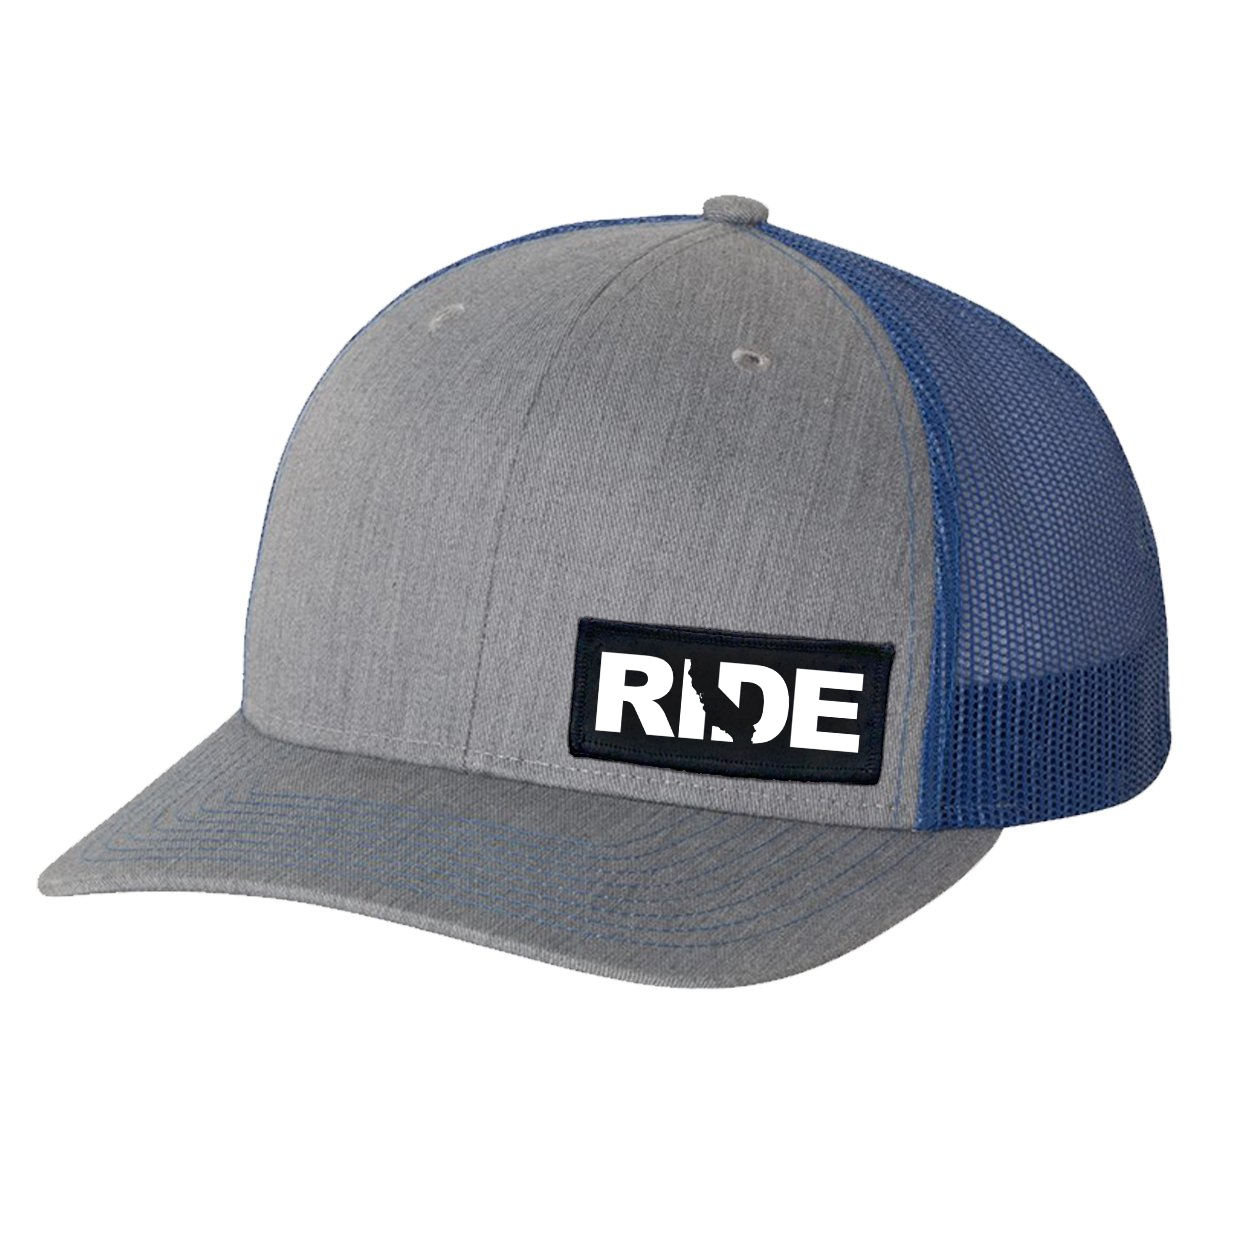 Ride California Night Out Woven Patch Snapback Trucker Hat Heather Grey/Royal (White Logo)